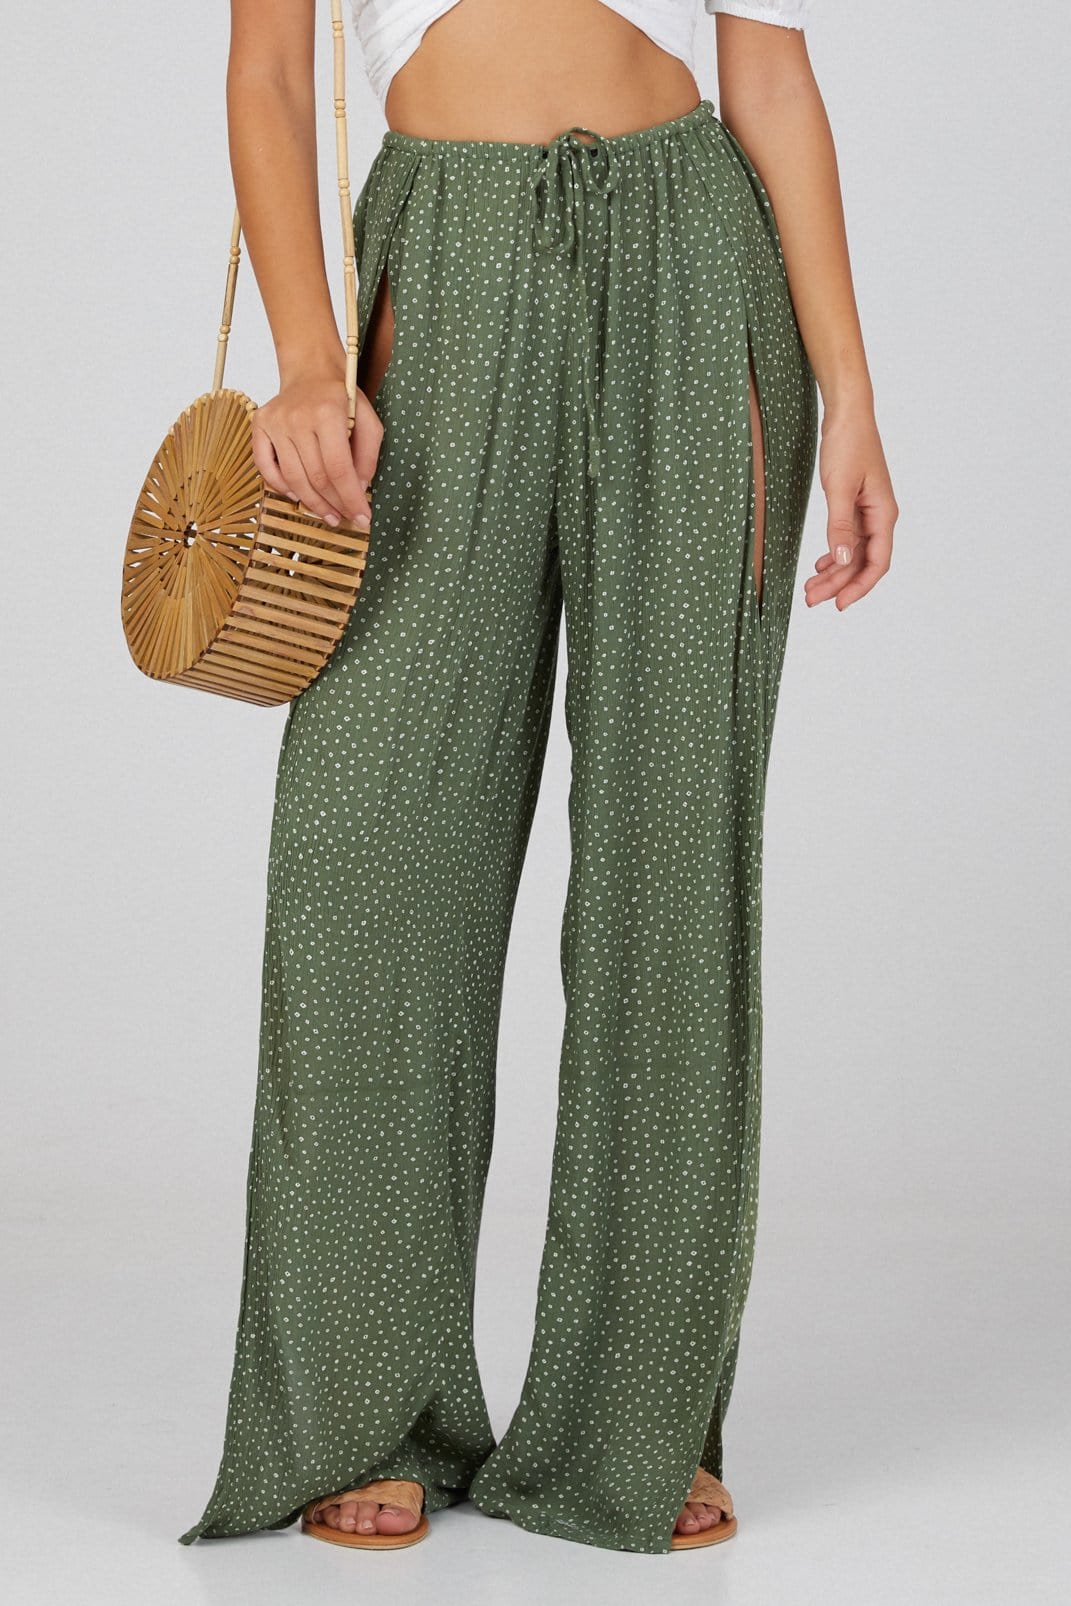 Nora Long Pant  Lost in Paradise